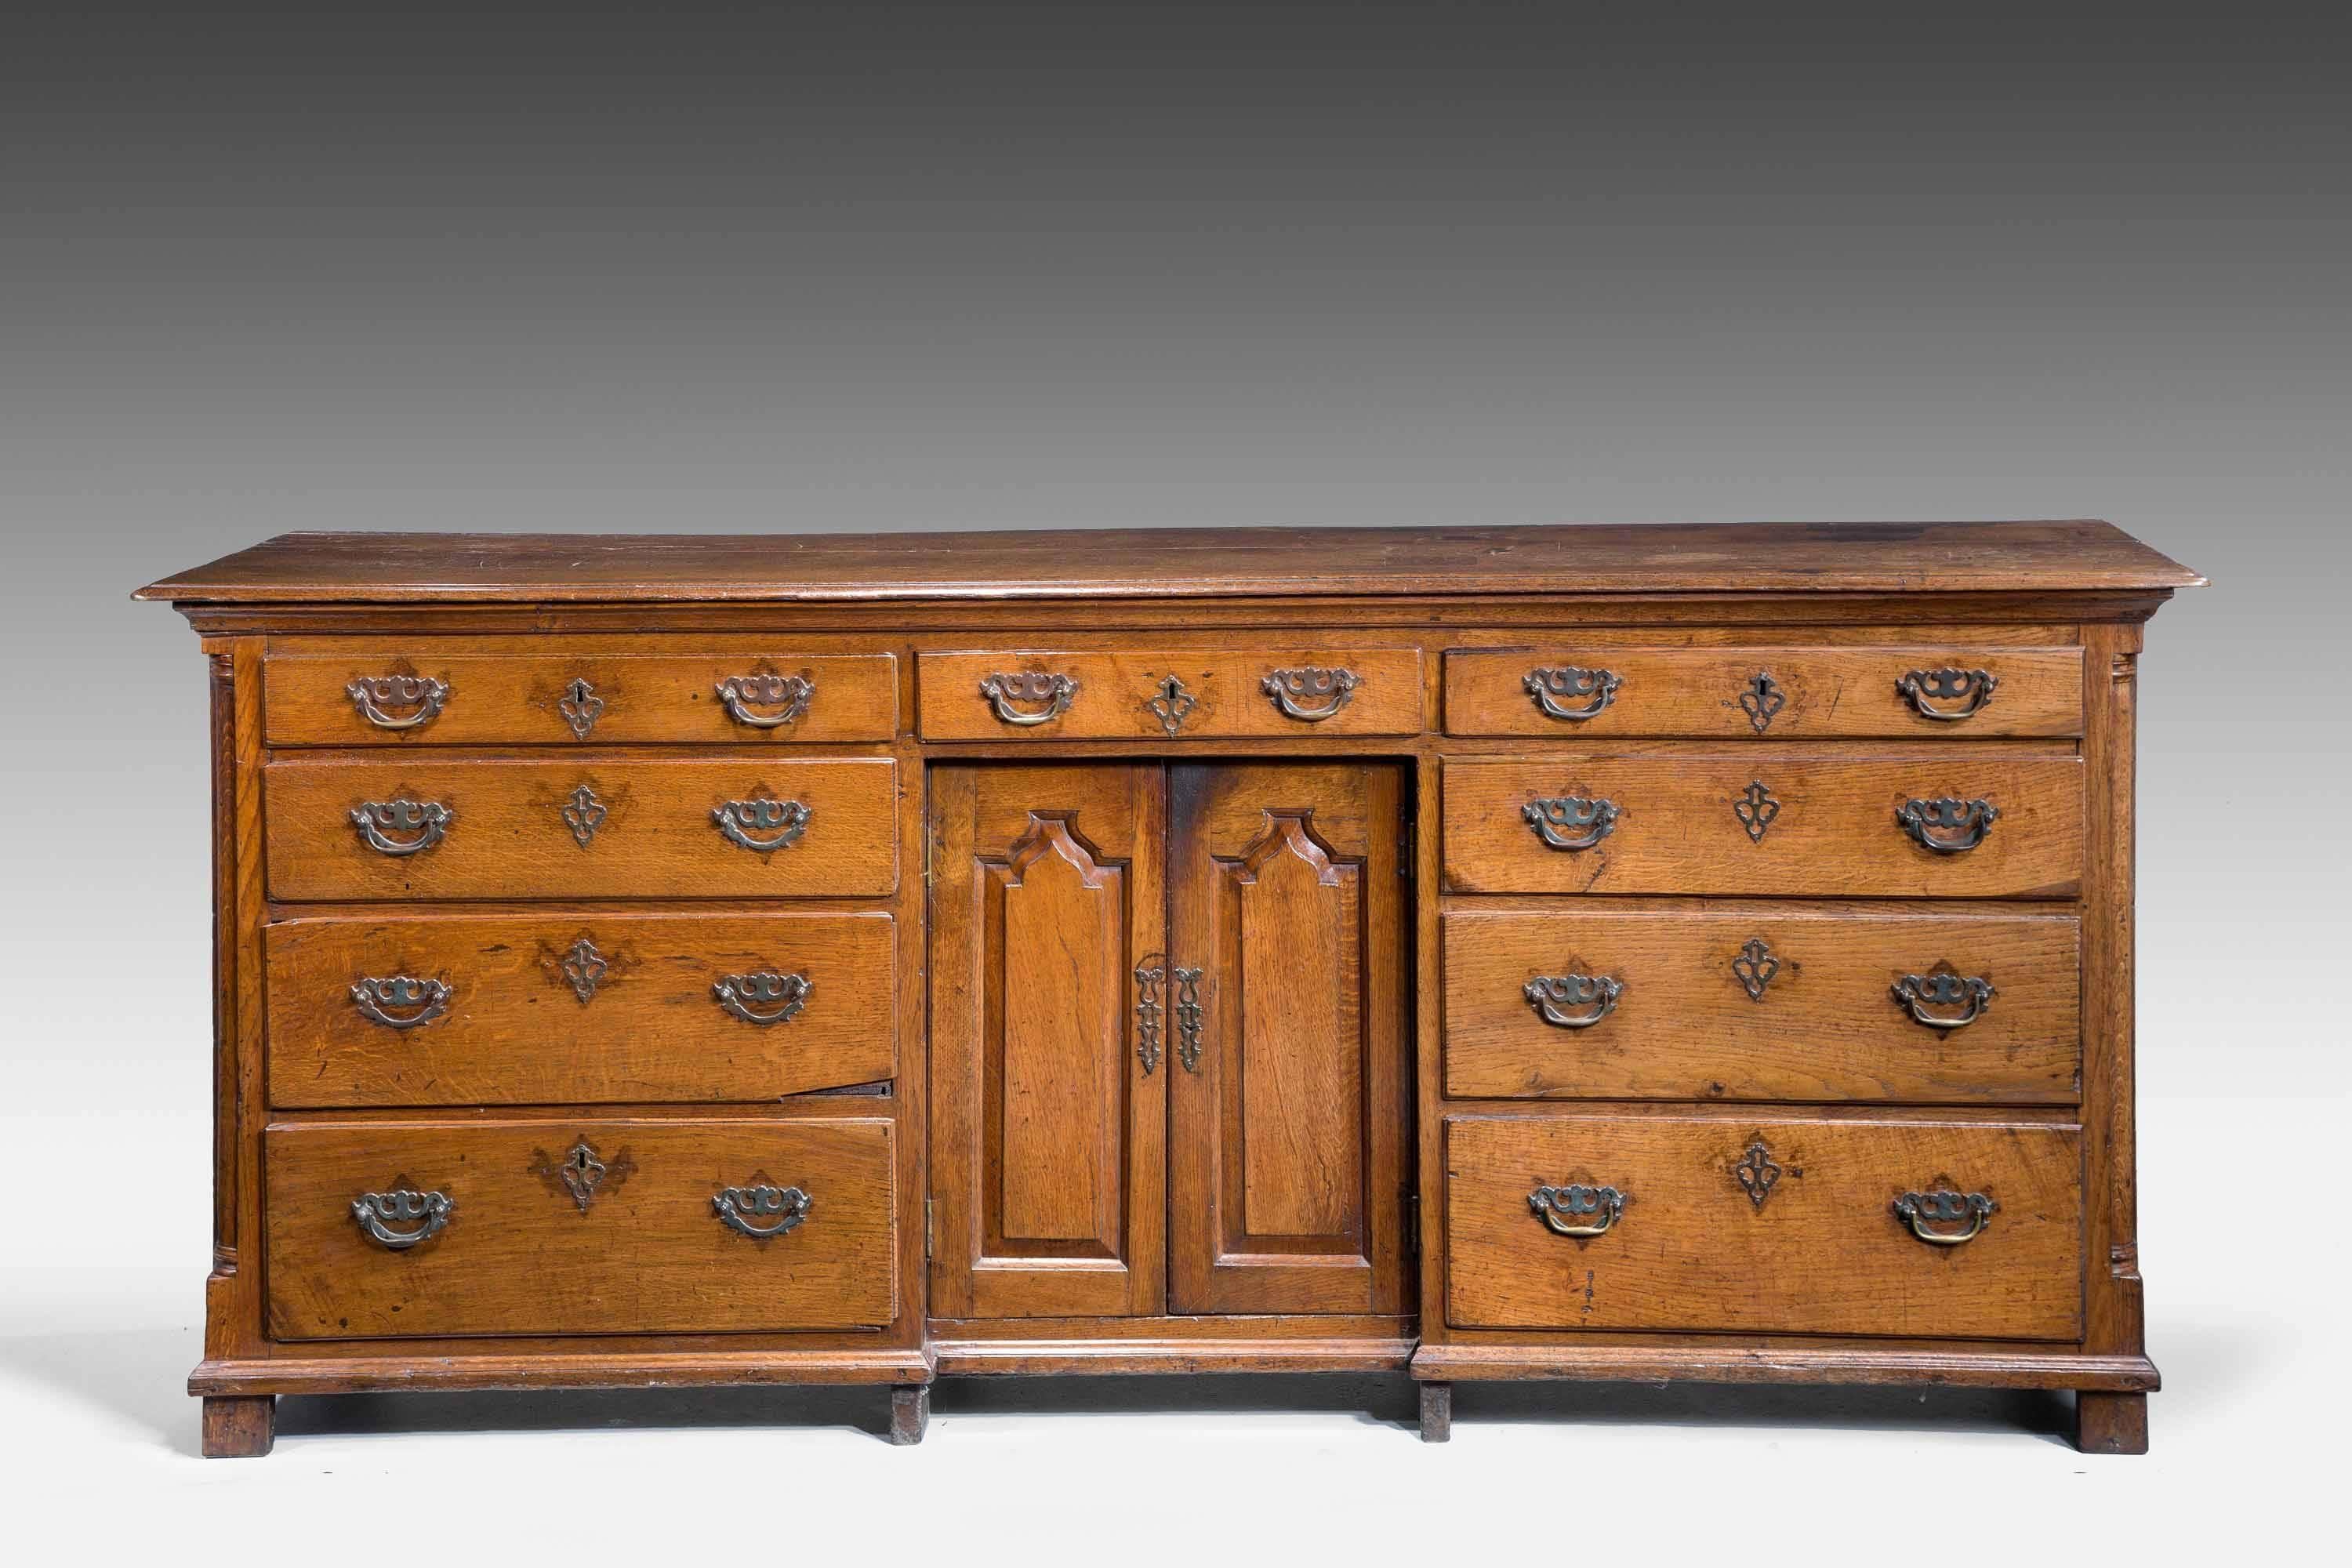 Good George III period oak dresser base incorporating a recess within a pair of panelled doors, nine graduated drawers to the front, the top patched during the 19th century. Strong overall design.

A Welsh dresser sometimes known as a kitchen